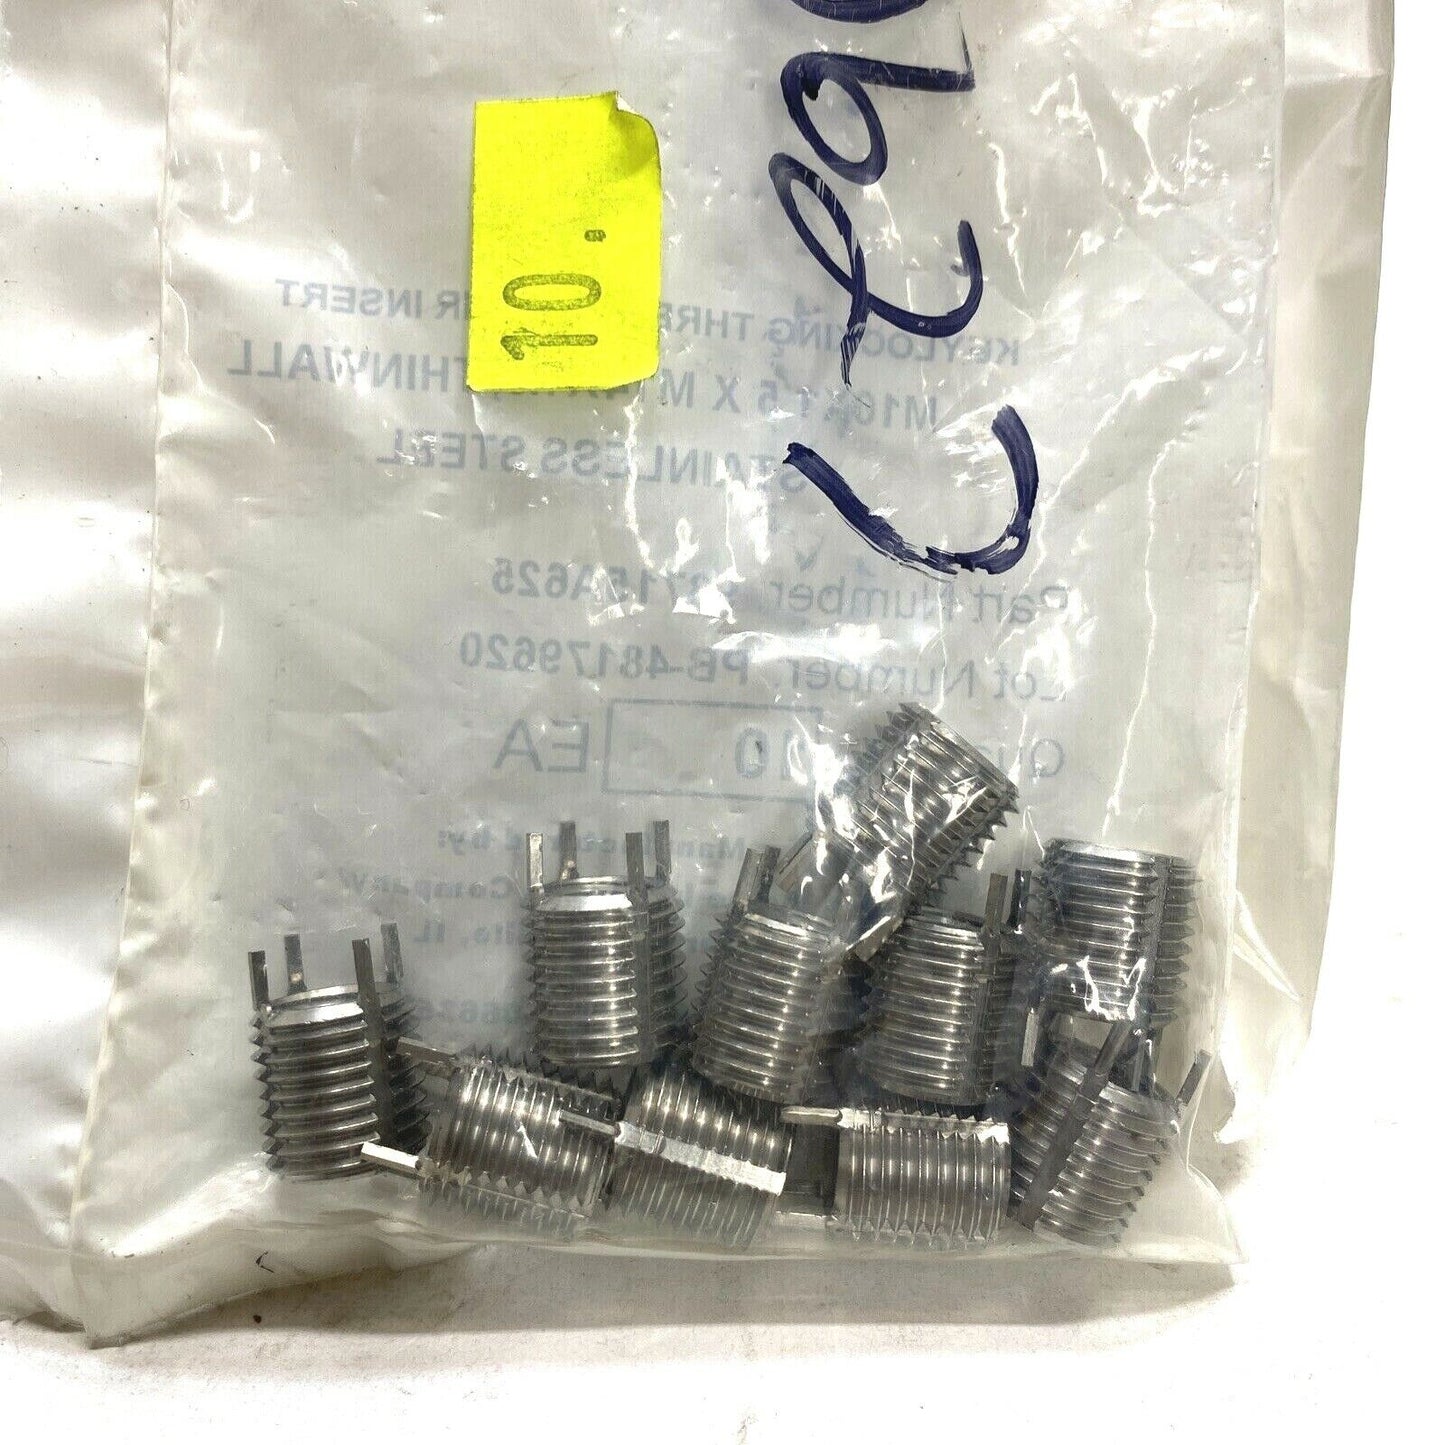 10 Pack Keylocking Threaded Inserts- M10X1.5 X M14X1.5 STAINLESS STEEL - 10 pack